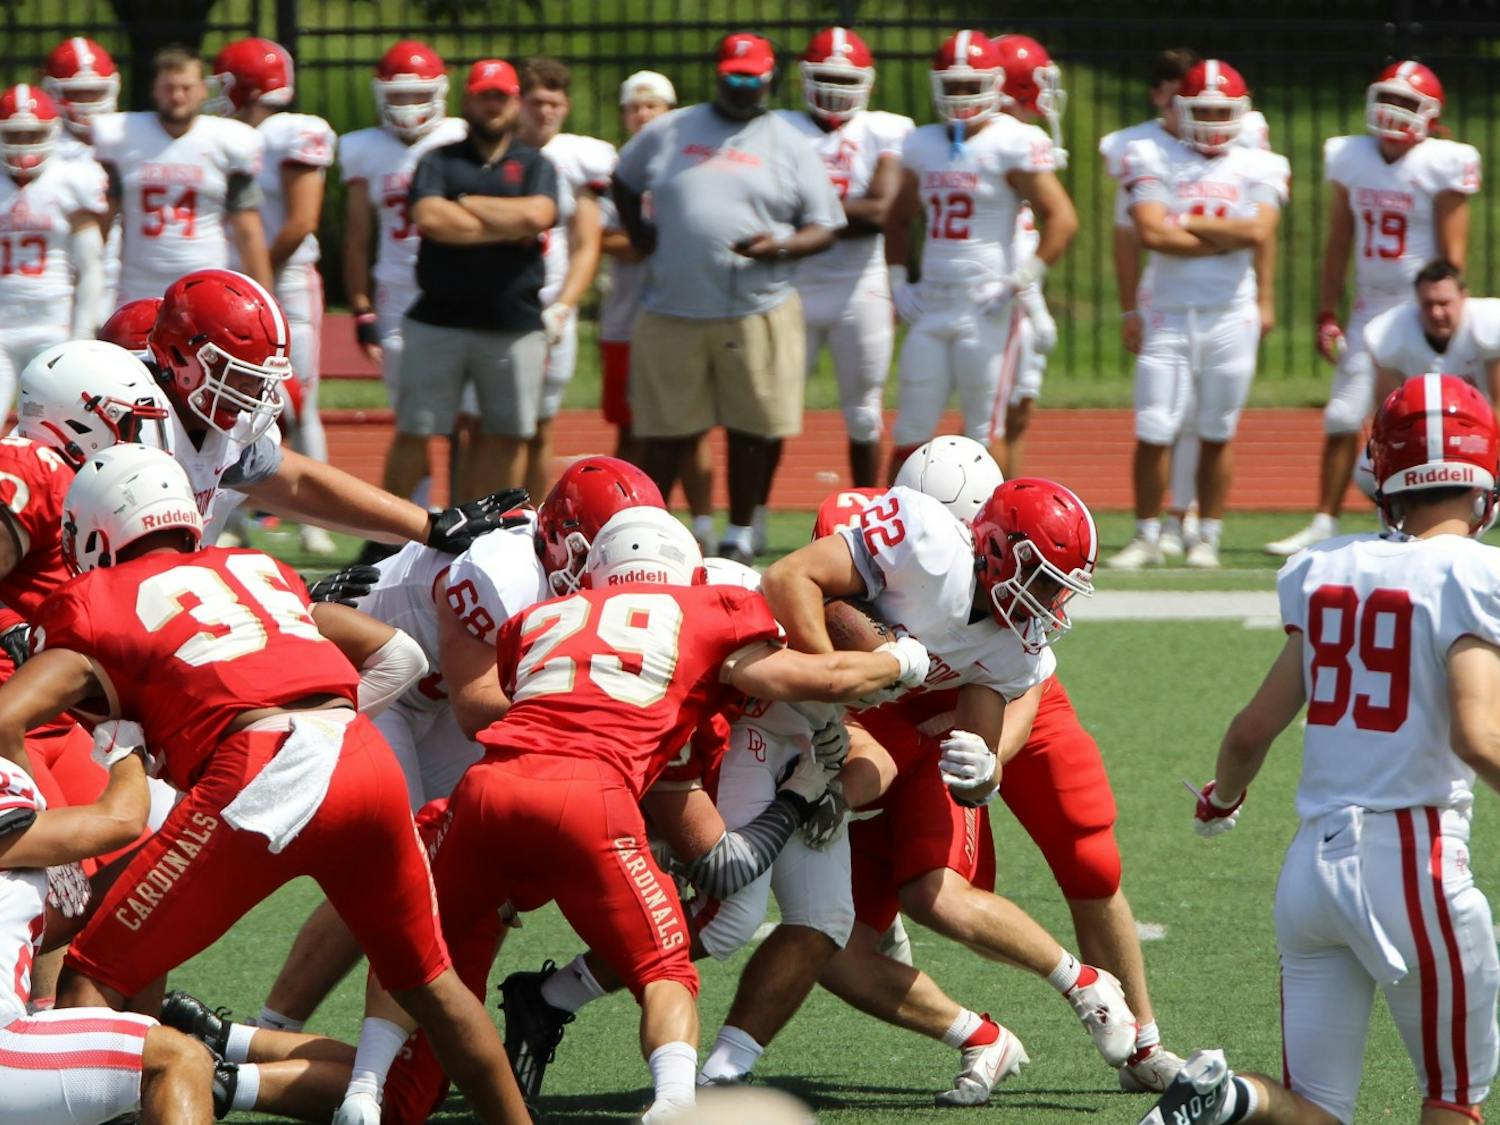 The Otterbein football team faced off against Denison in a scrimmage on Aug. 27.